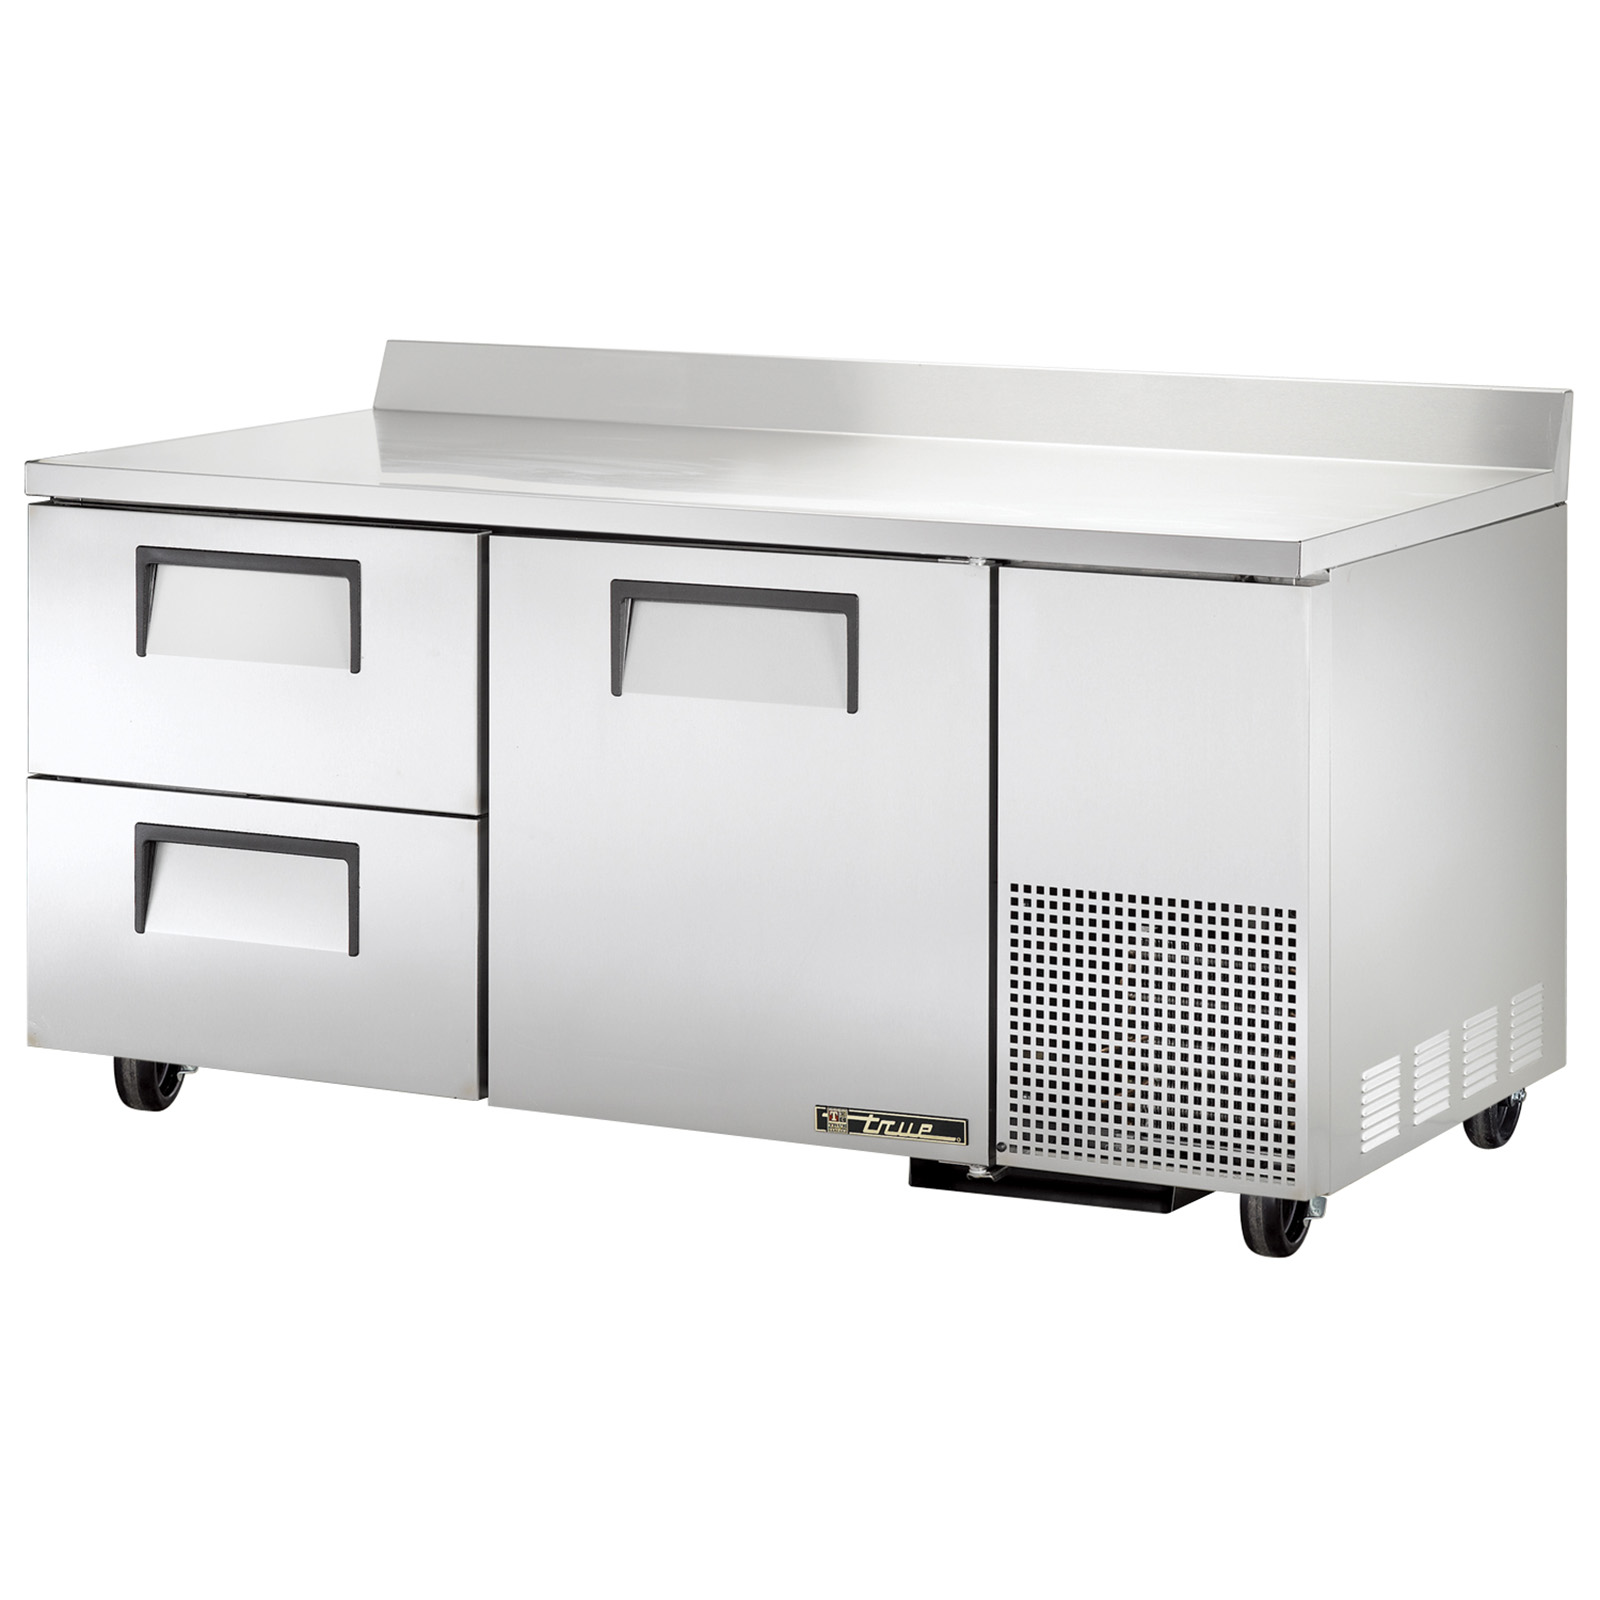 True Food Service Equipment TWT-67D-2 Refrigerated Counter, Work Top